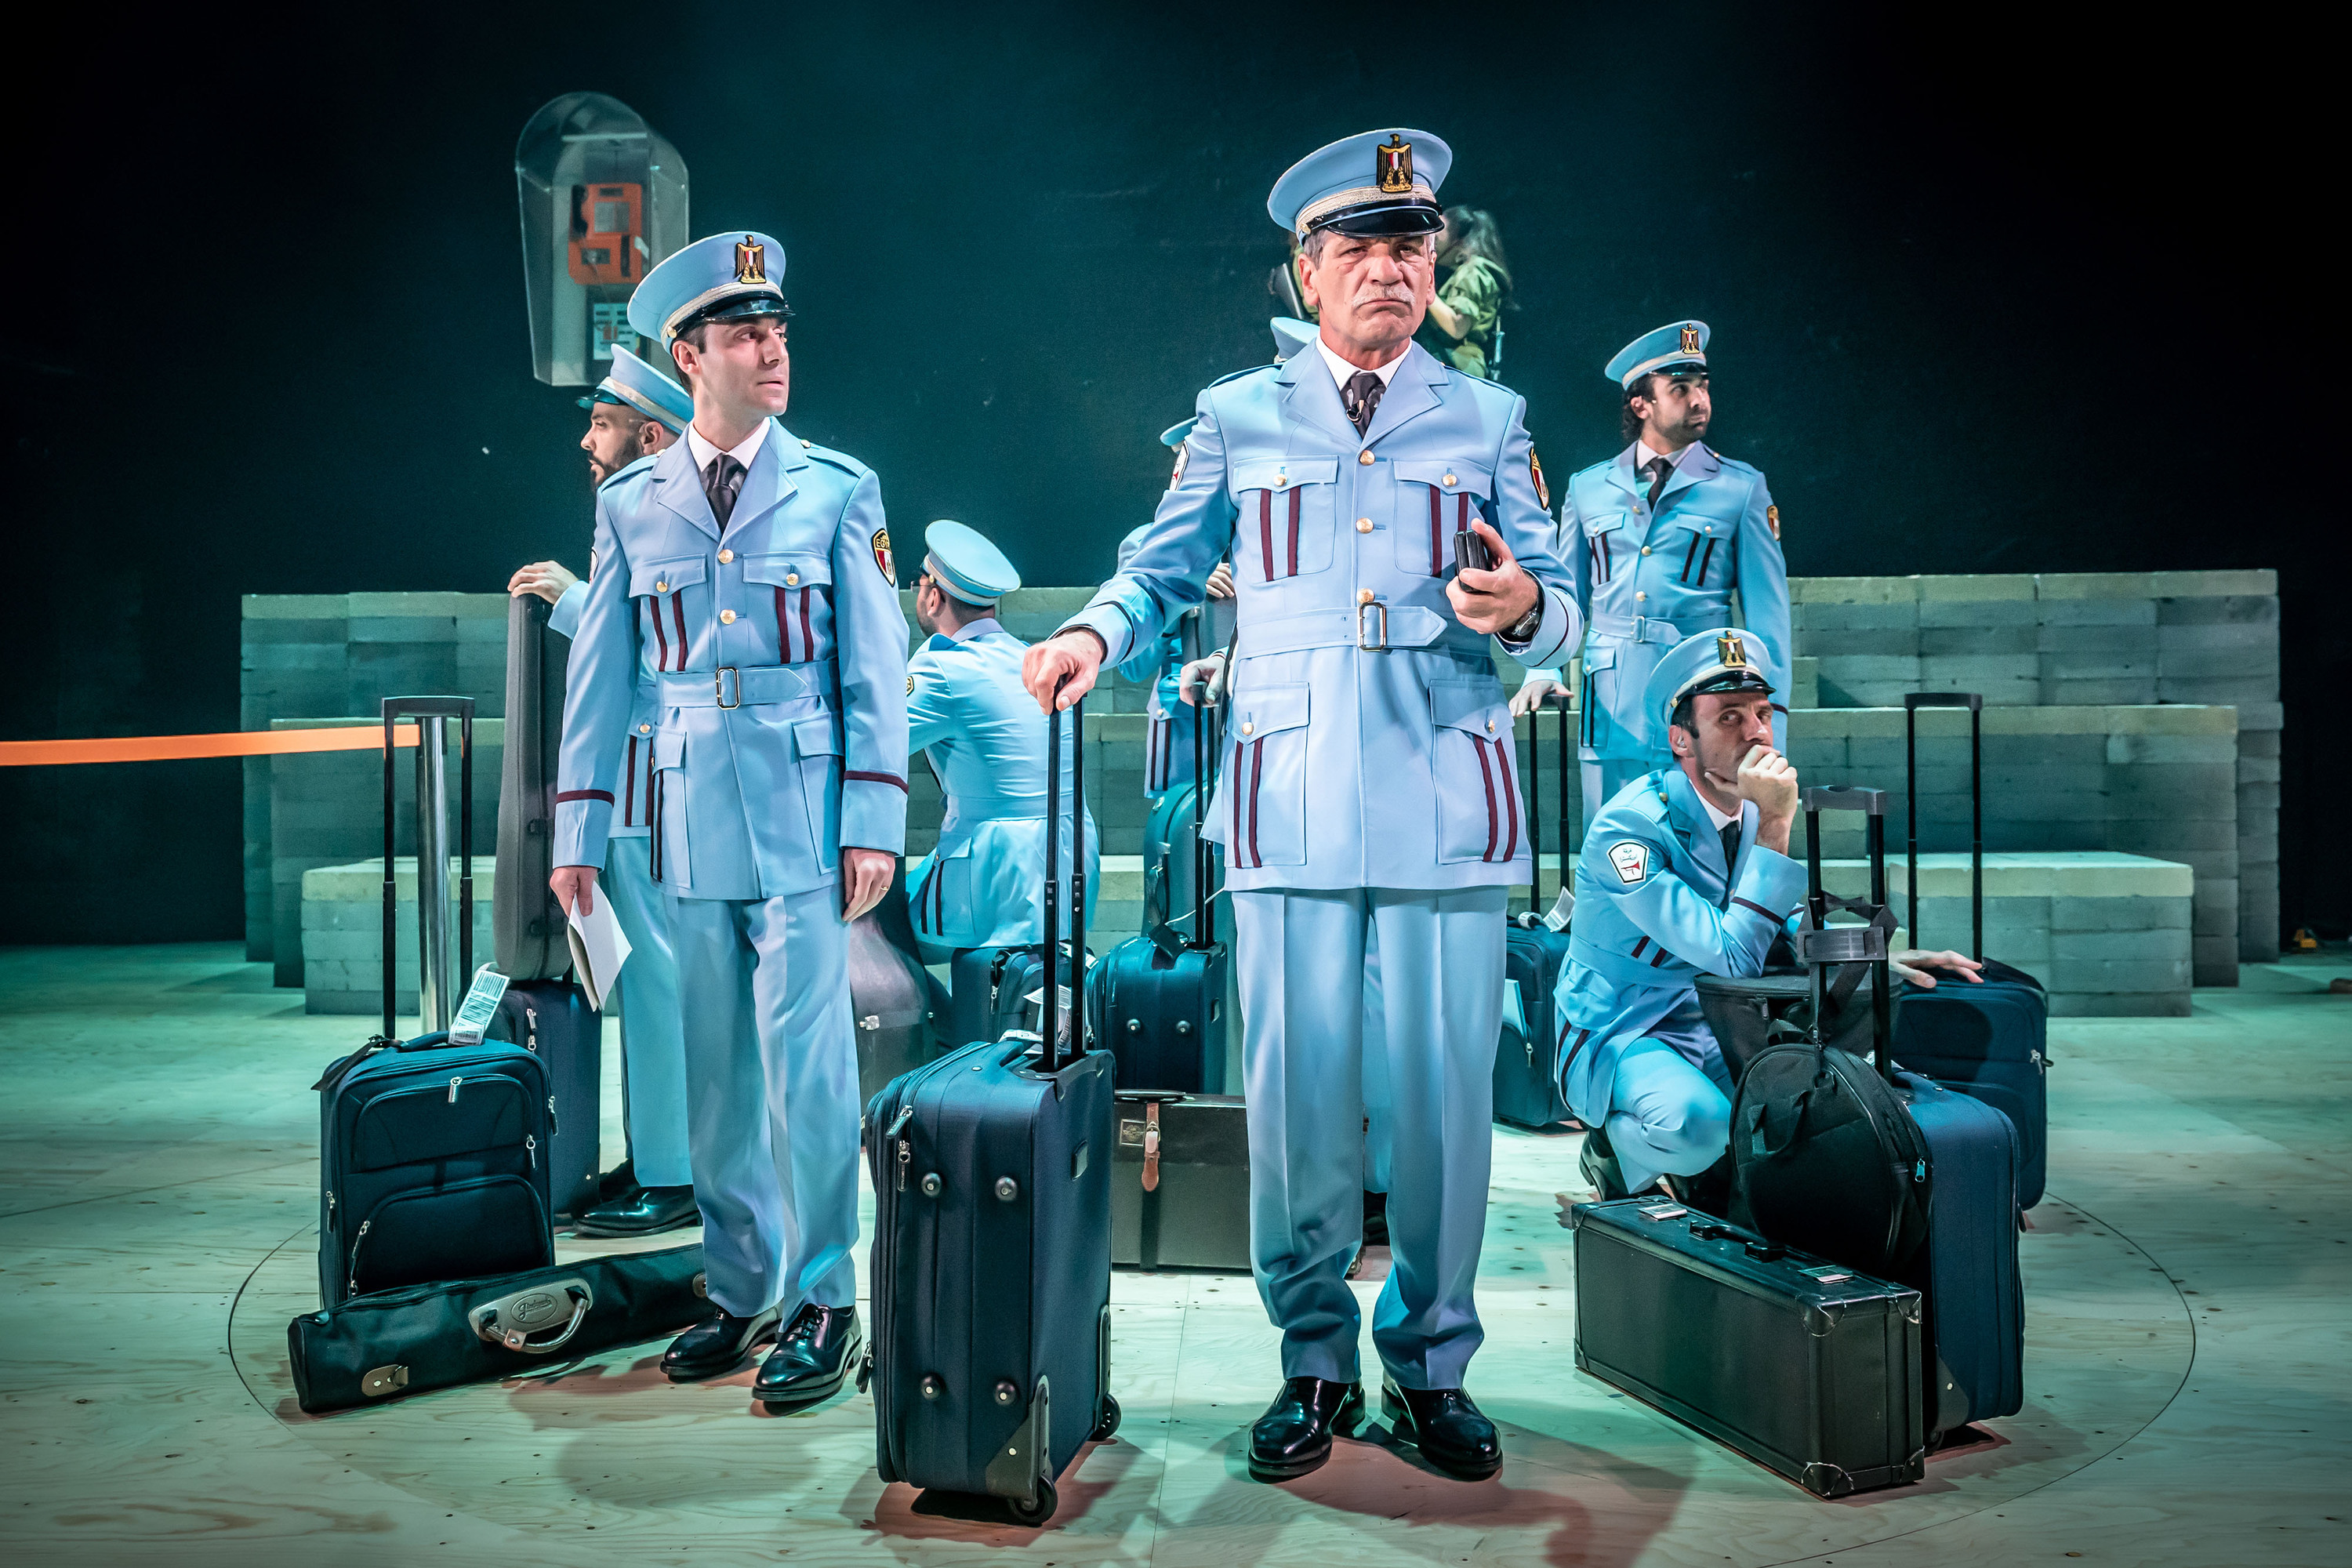 reviews of the band's visit musical